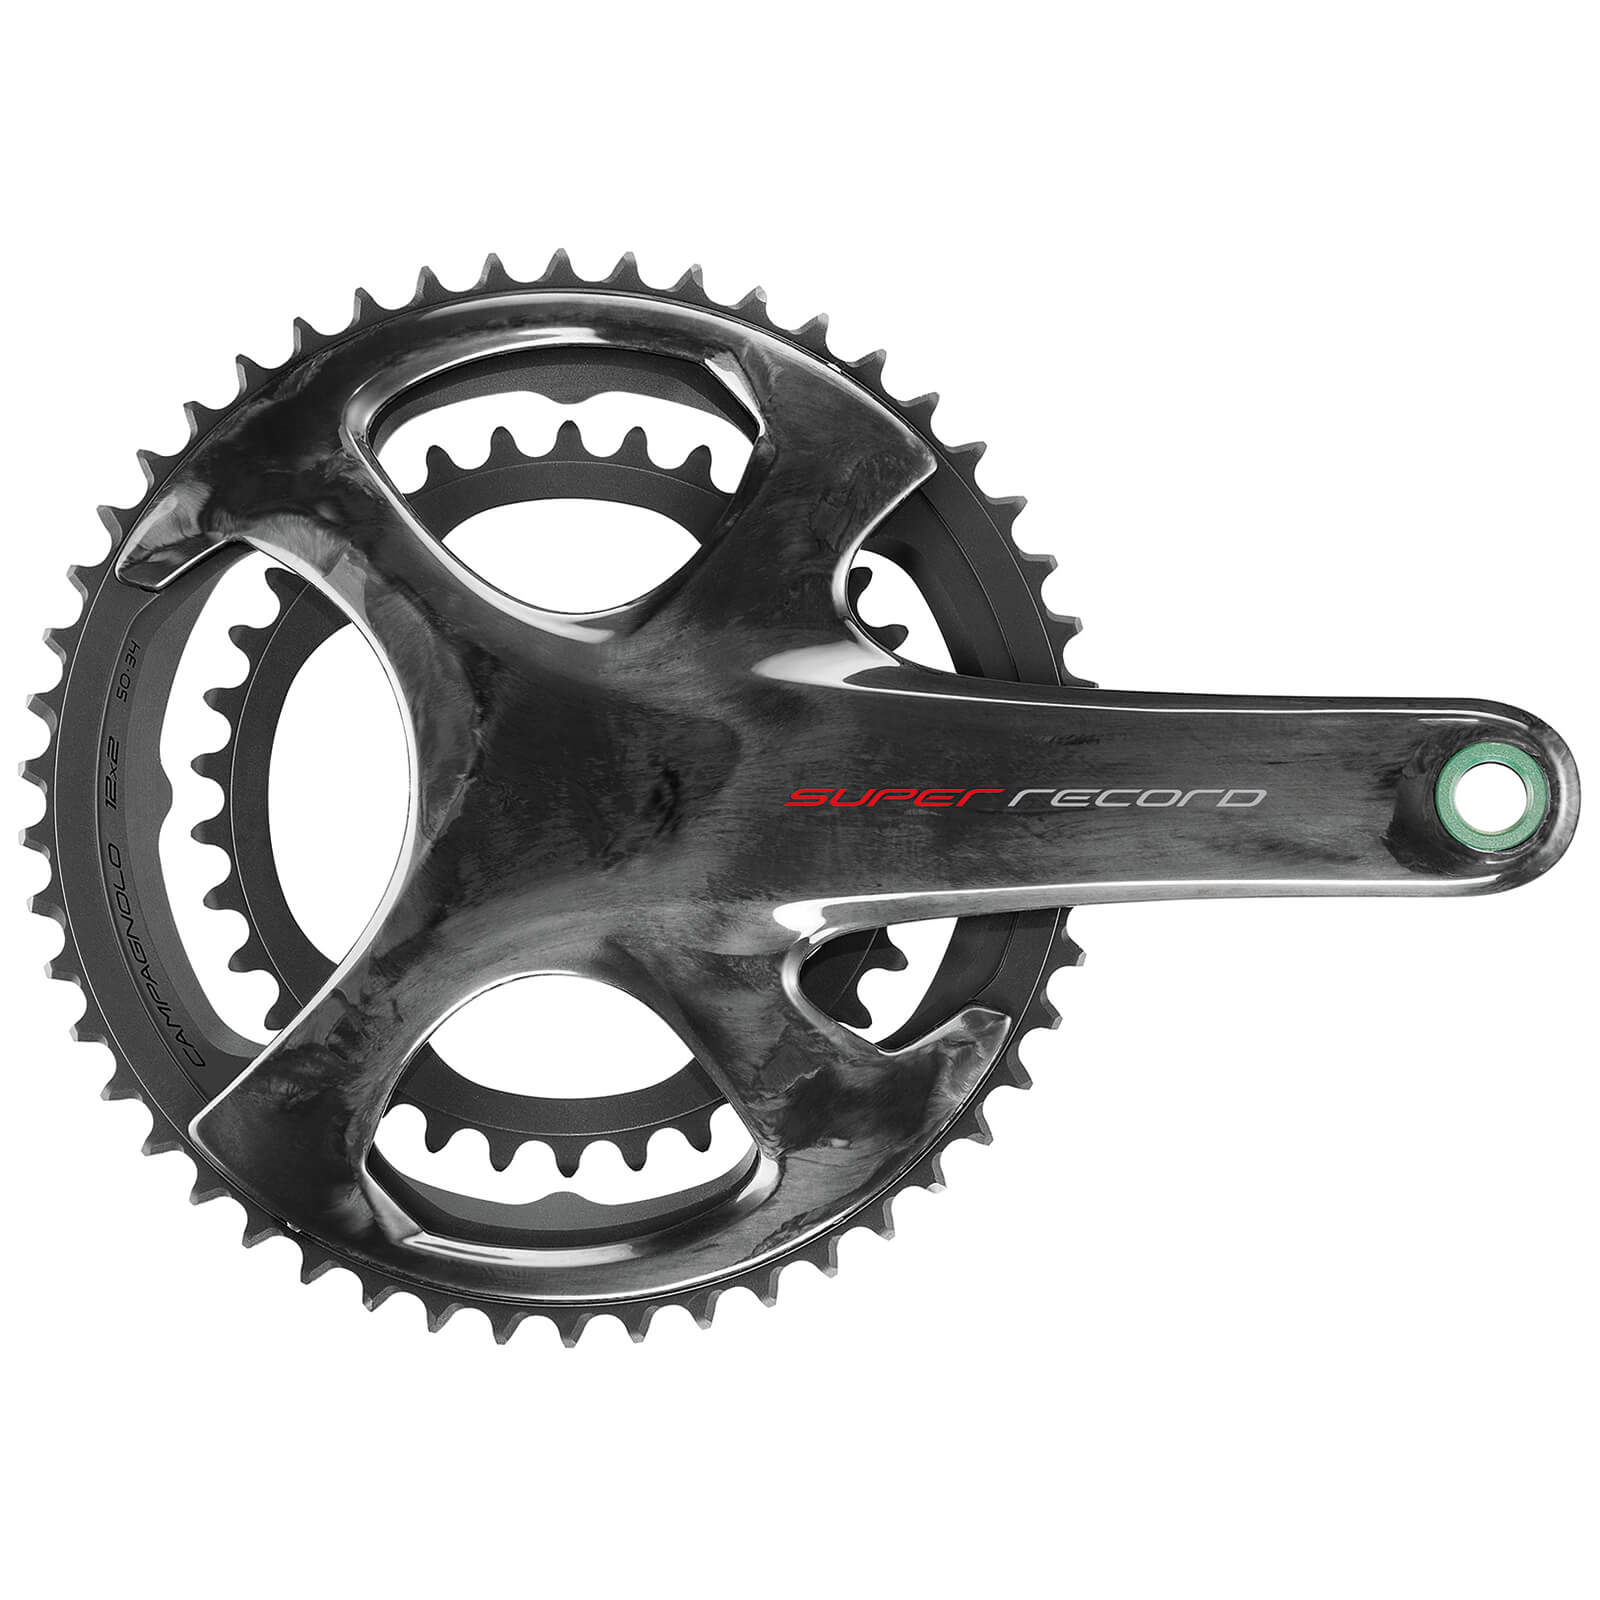 Campagnolo Super Record UT TI Carbon 12 Speed Chainset - 52-36T - 175mm